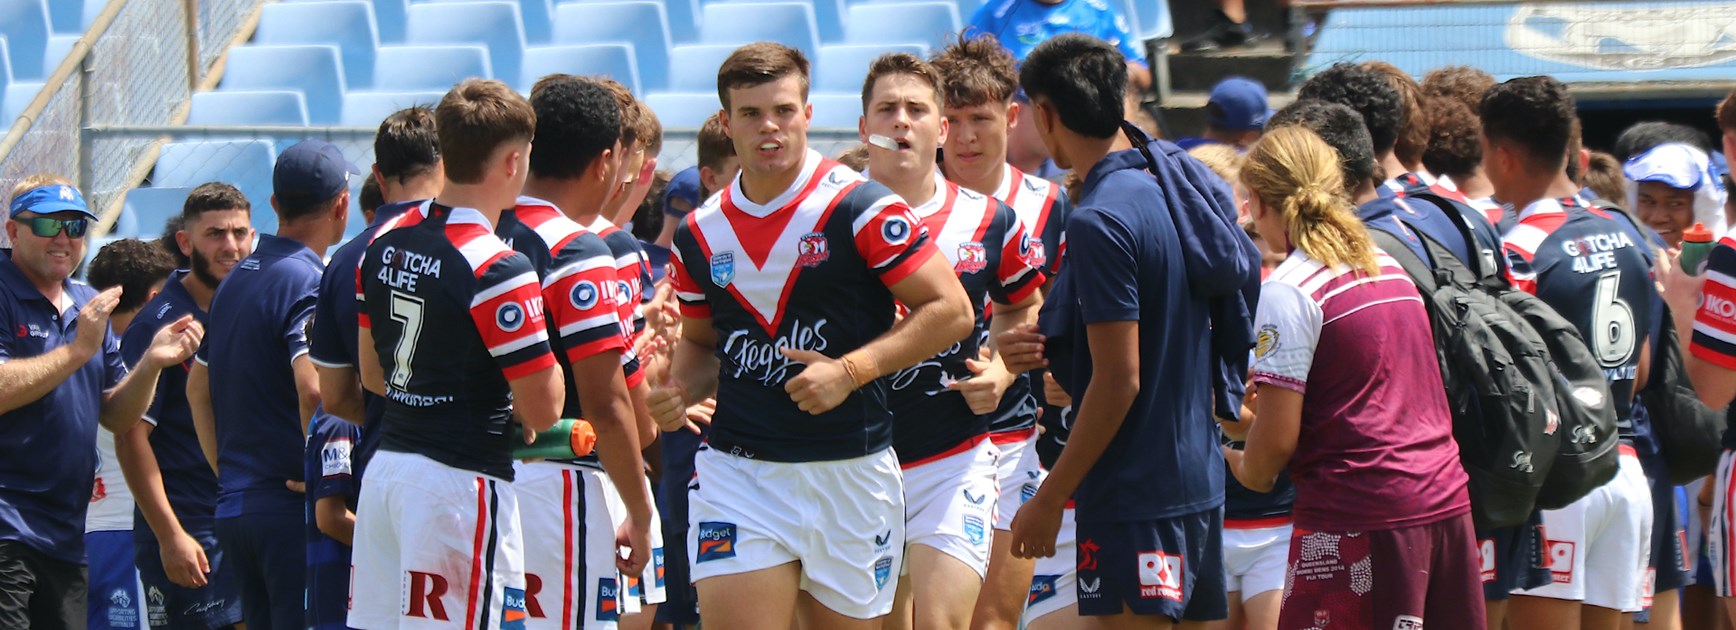 Roosters Ready to Rock Junior Reps Finals